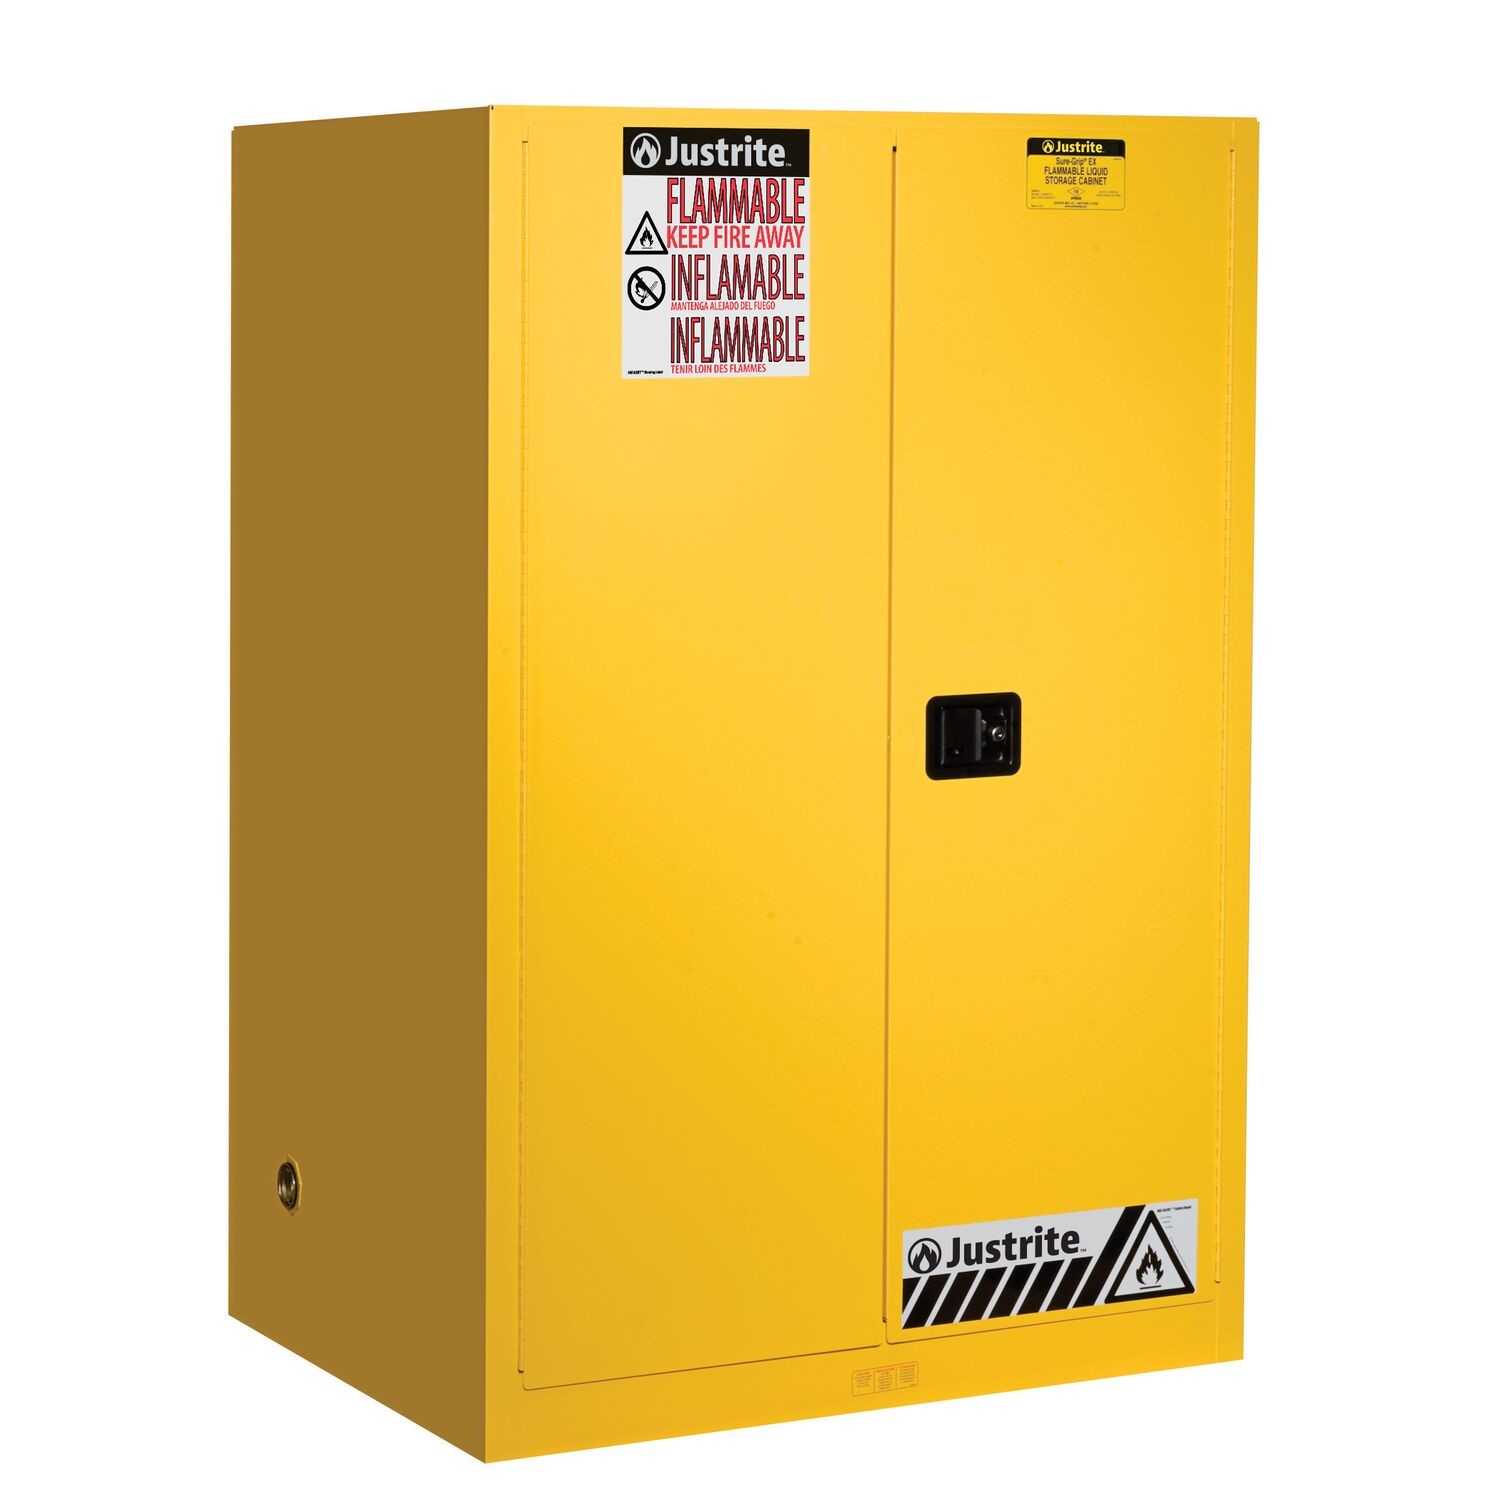 Justrite Flammable Storage Cabinets